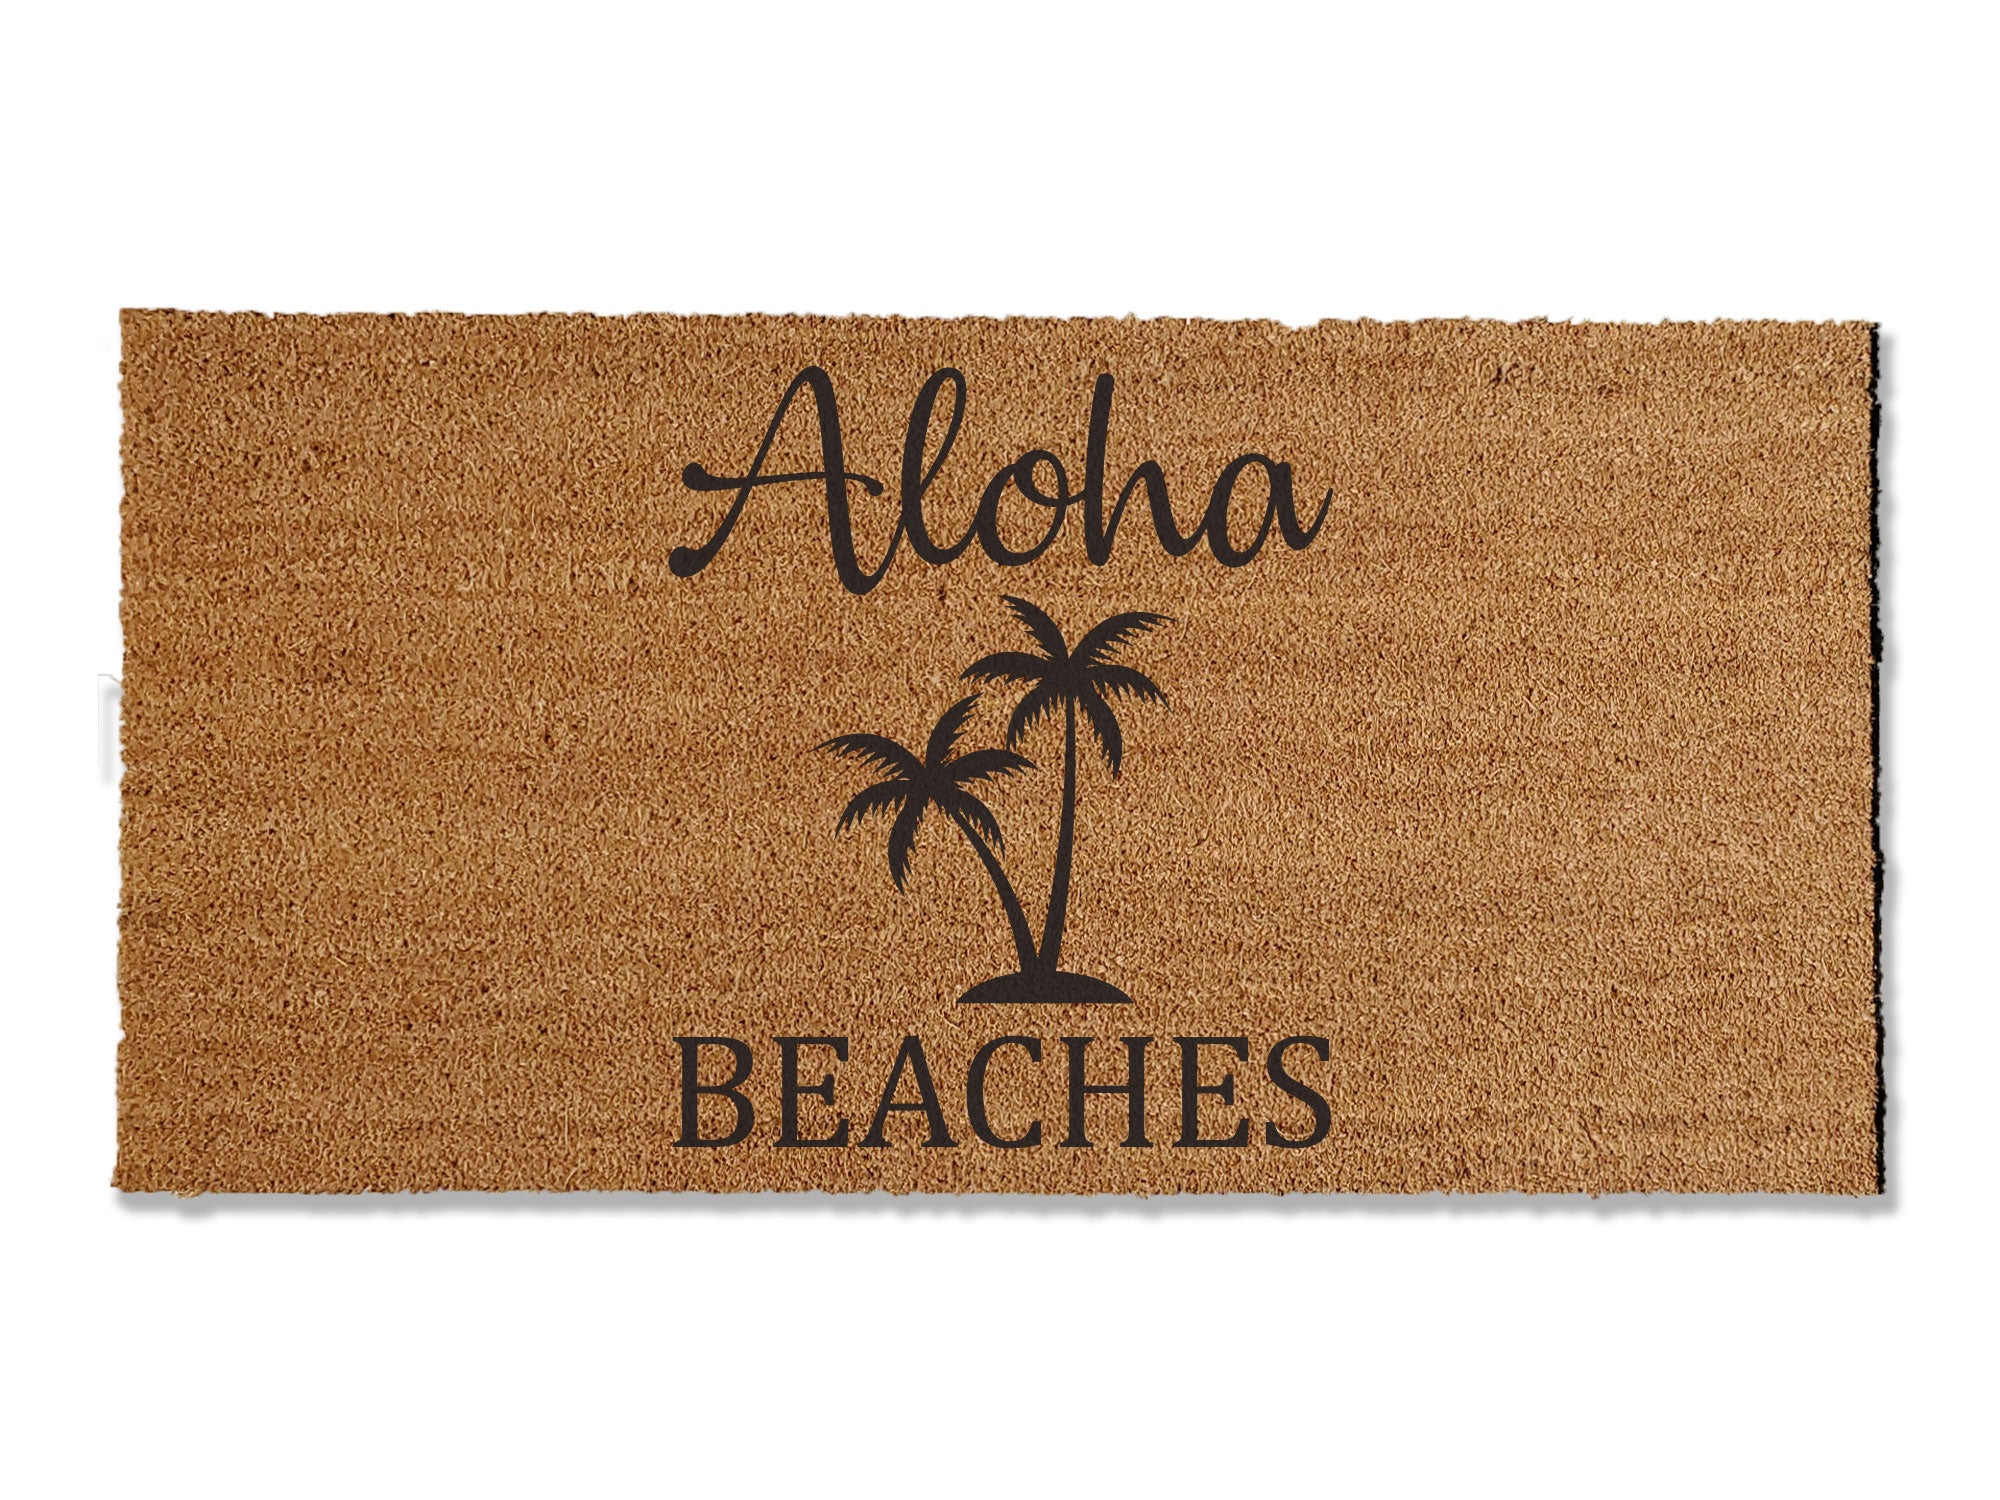 24 inches by 48 inches coir doormat with graphic printed onto the doormat. Aloha Beaches with palm trees